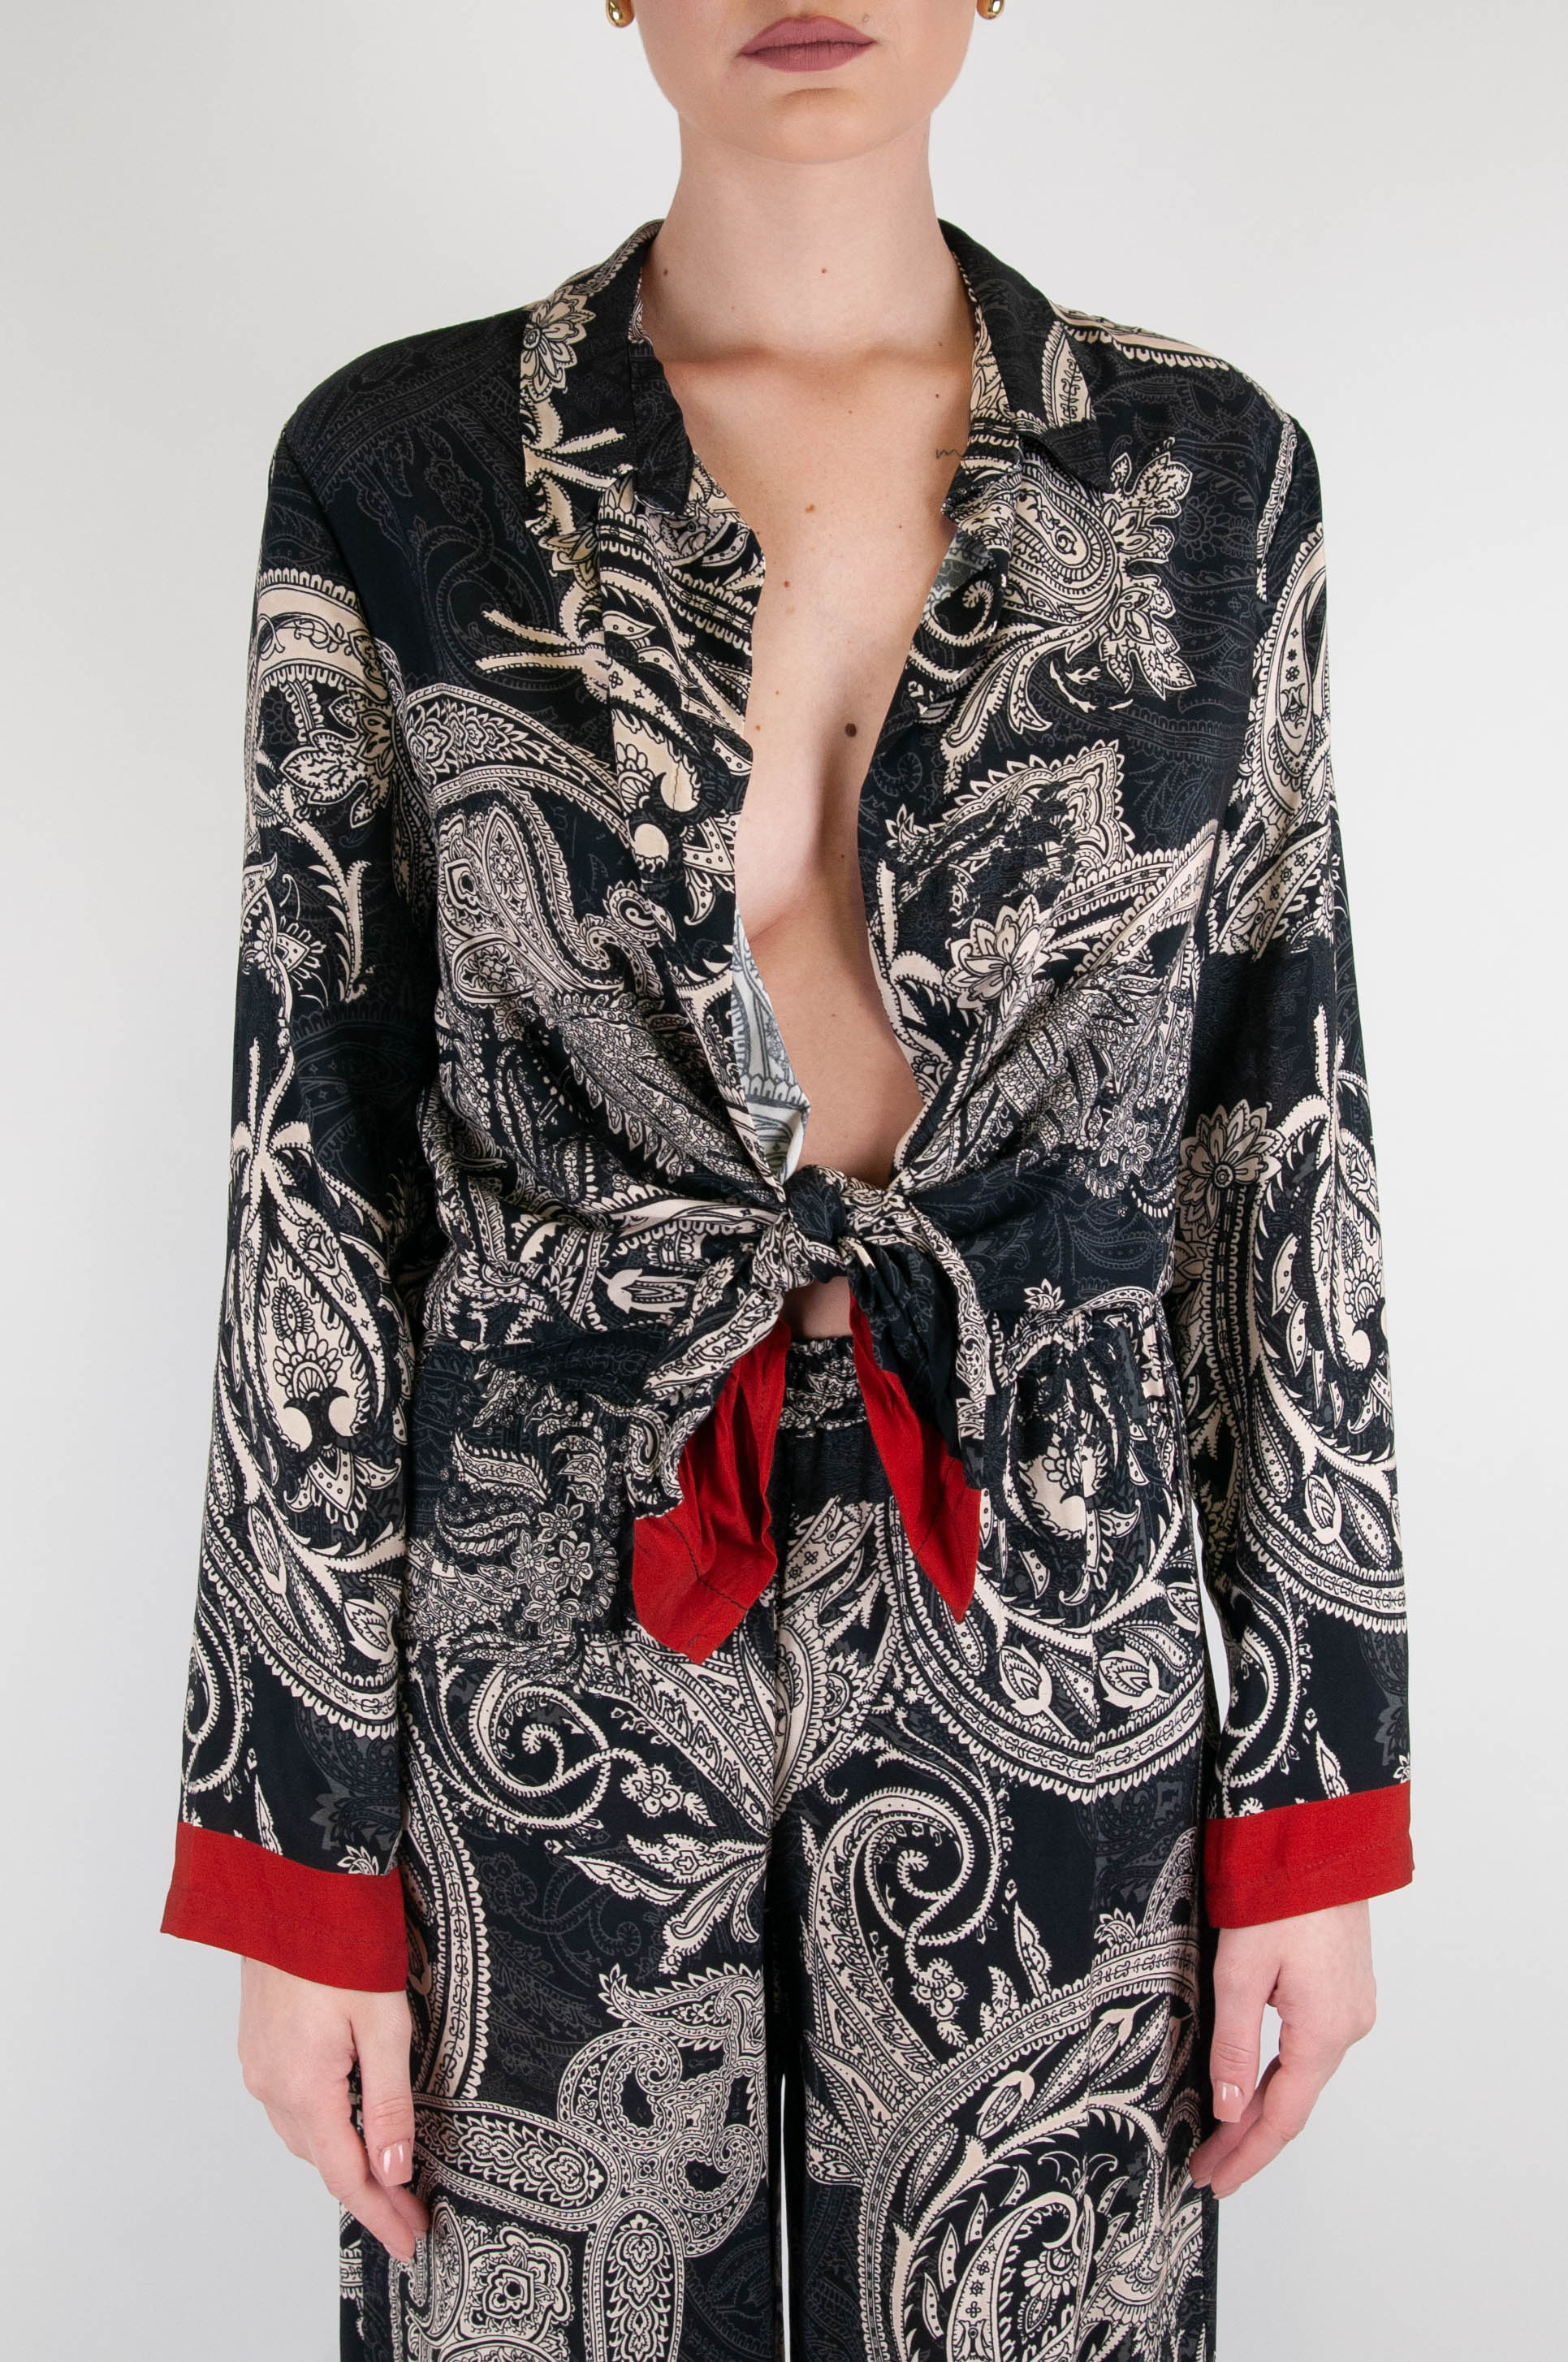 Haveone - Ethnic patterned open shirt in viscose with knot at the bottom